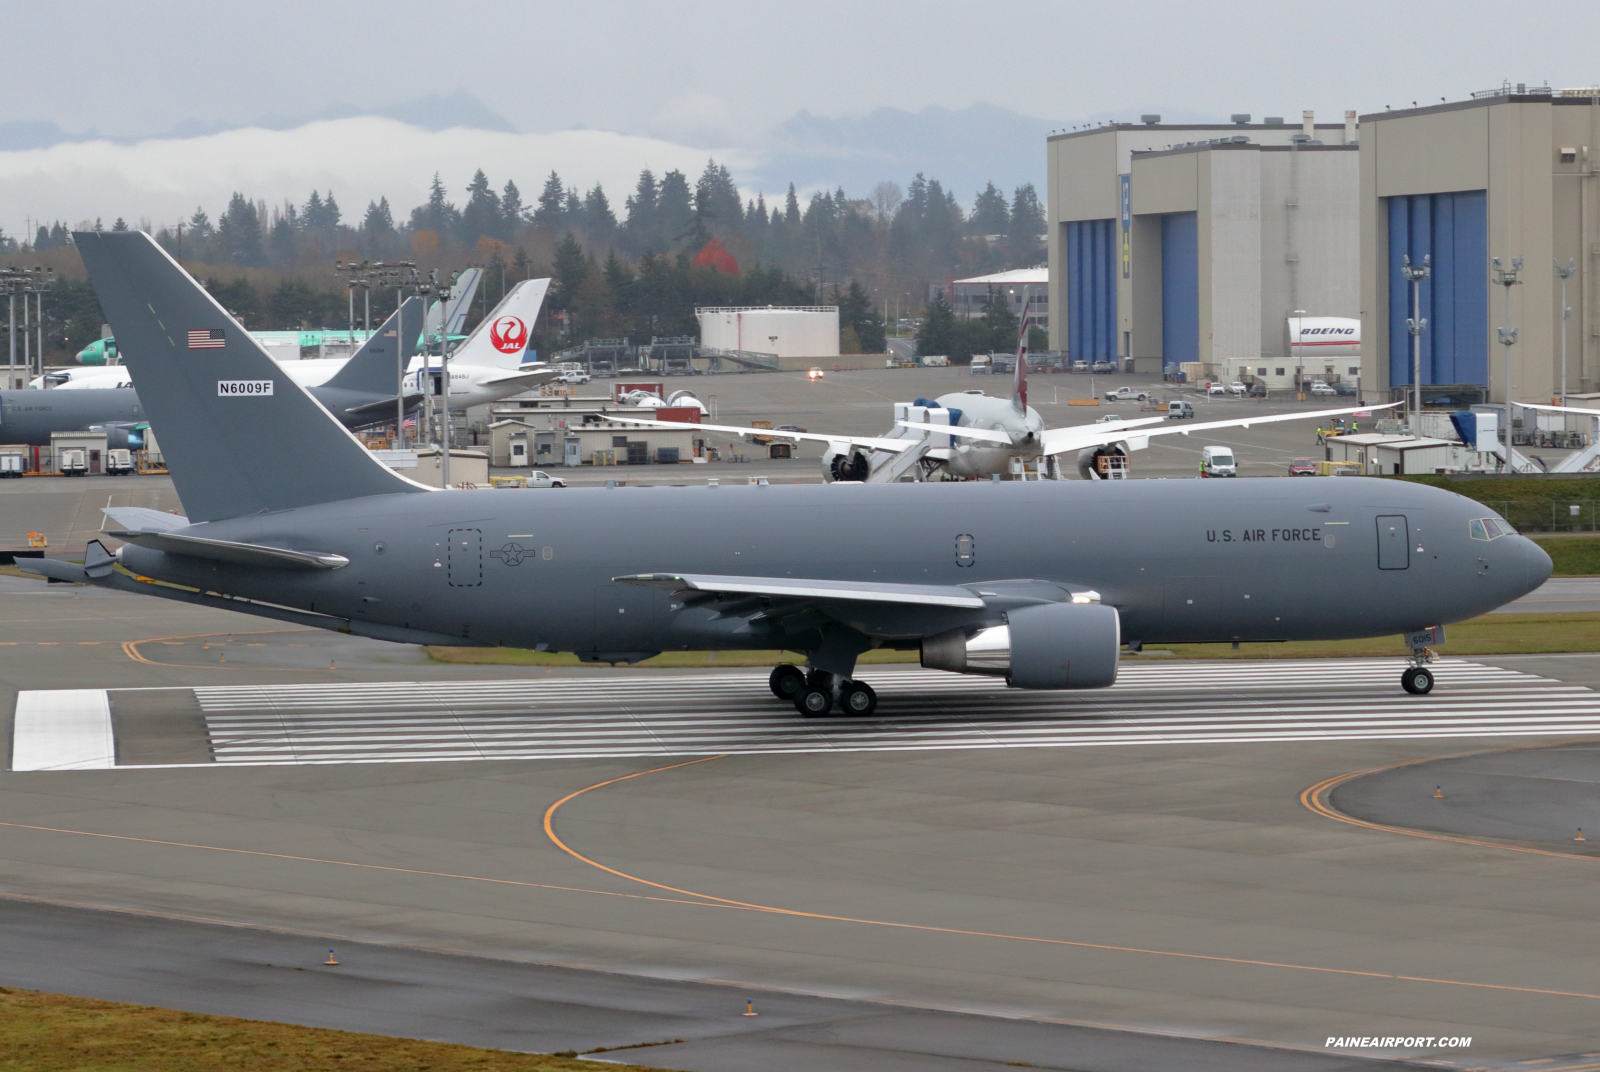 KC-46A 16-46015 at Paine Field